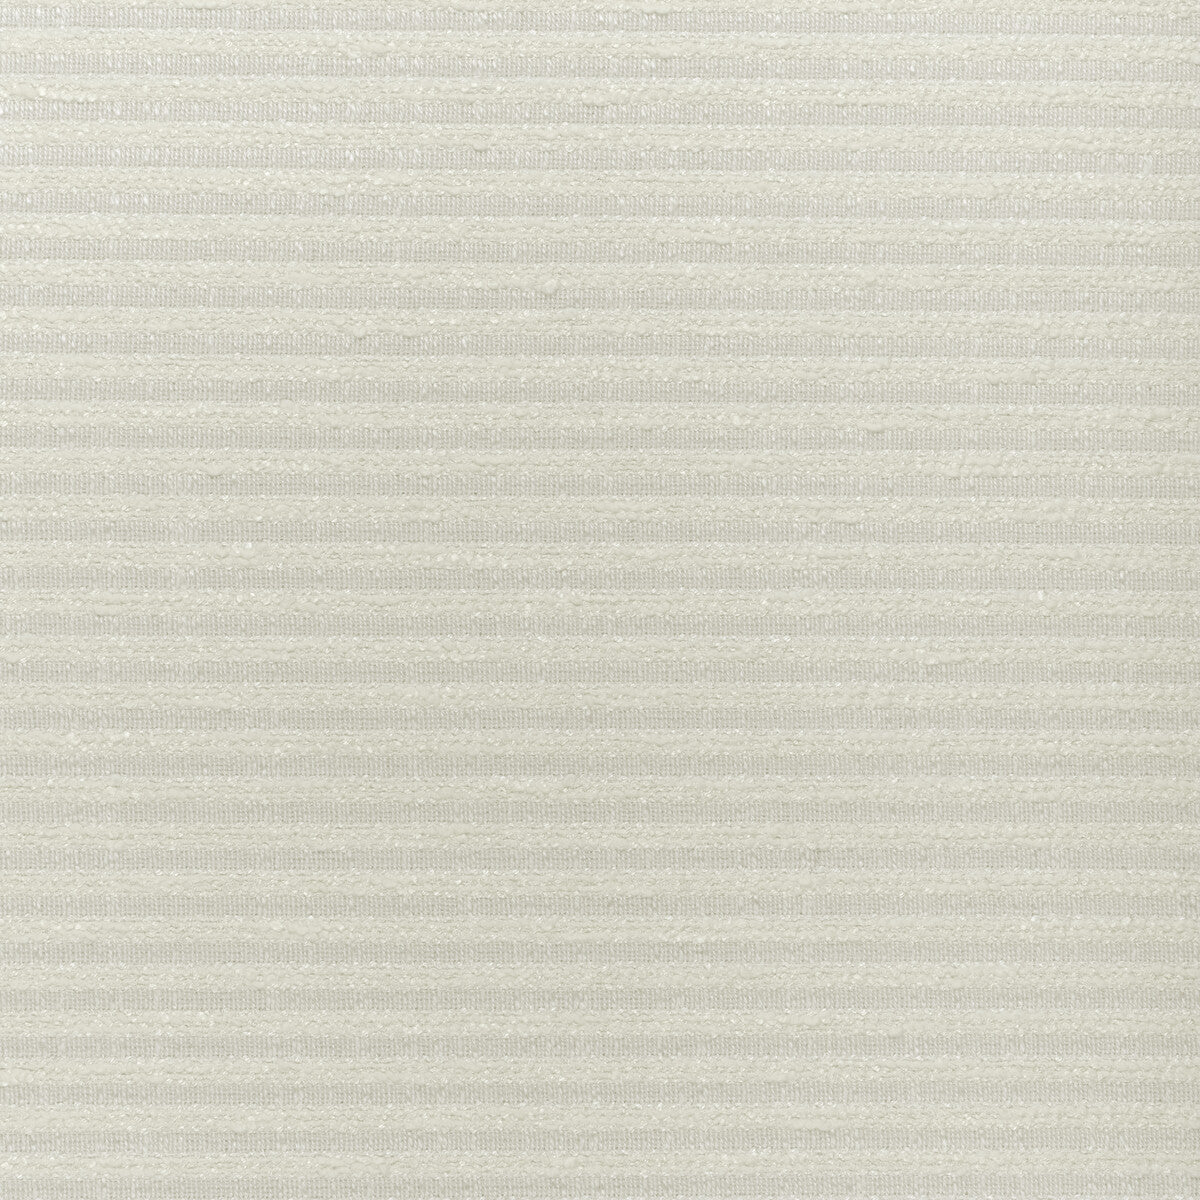 Plushy Stripe fabric in snow color - pattern 36859.101.0 - by Kravet Couture in the Atelier Weaves collection